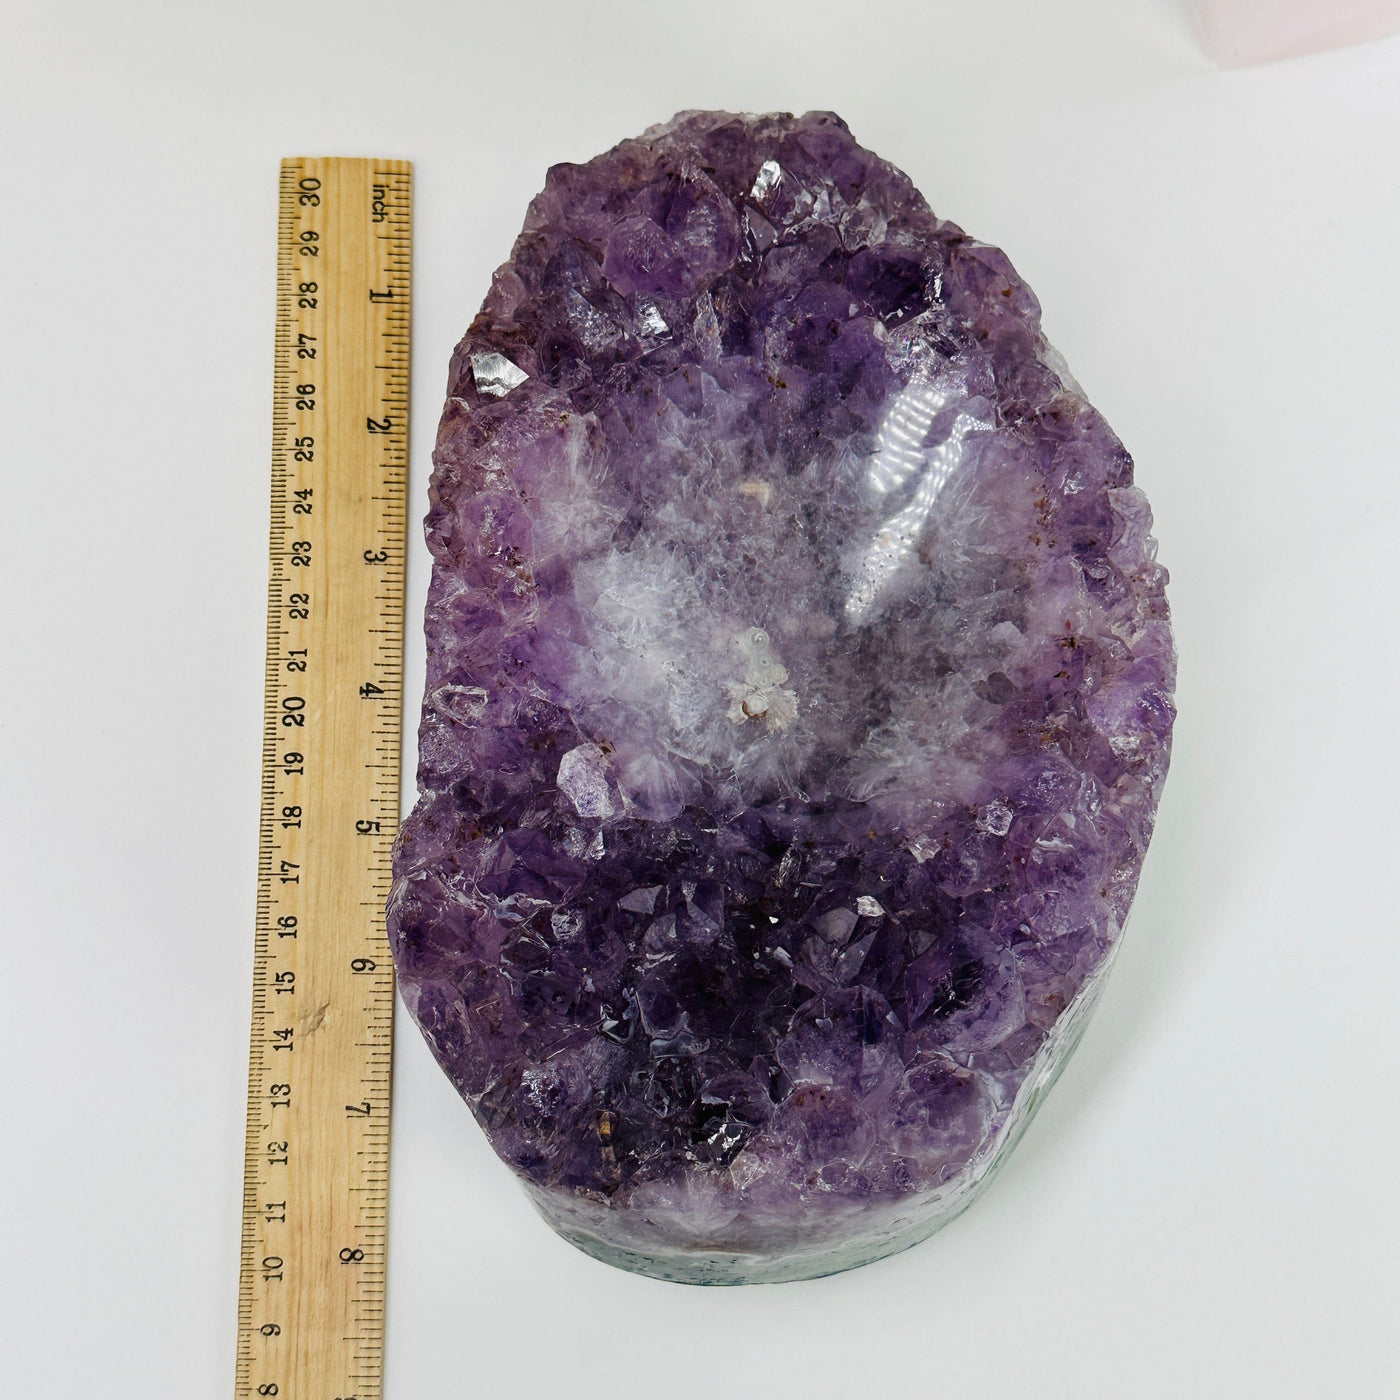 amethyst bowl next to a ruler for size reference